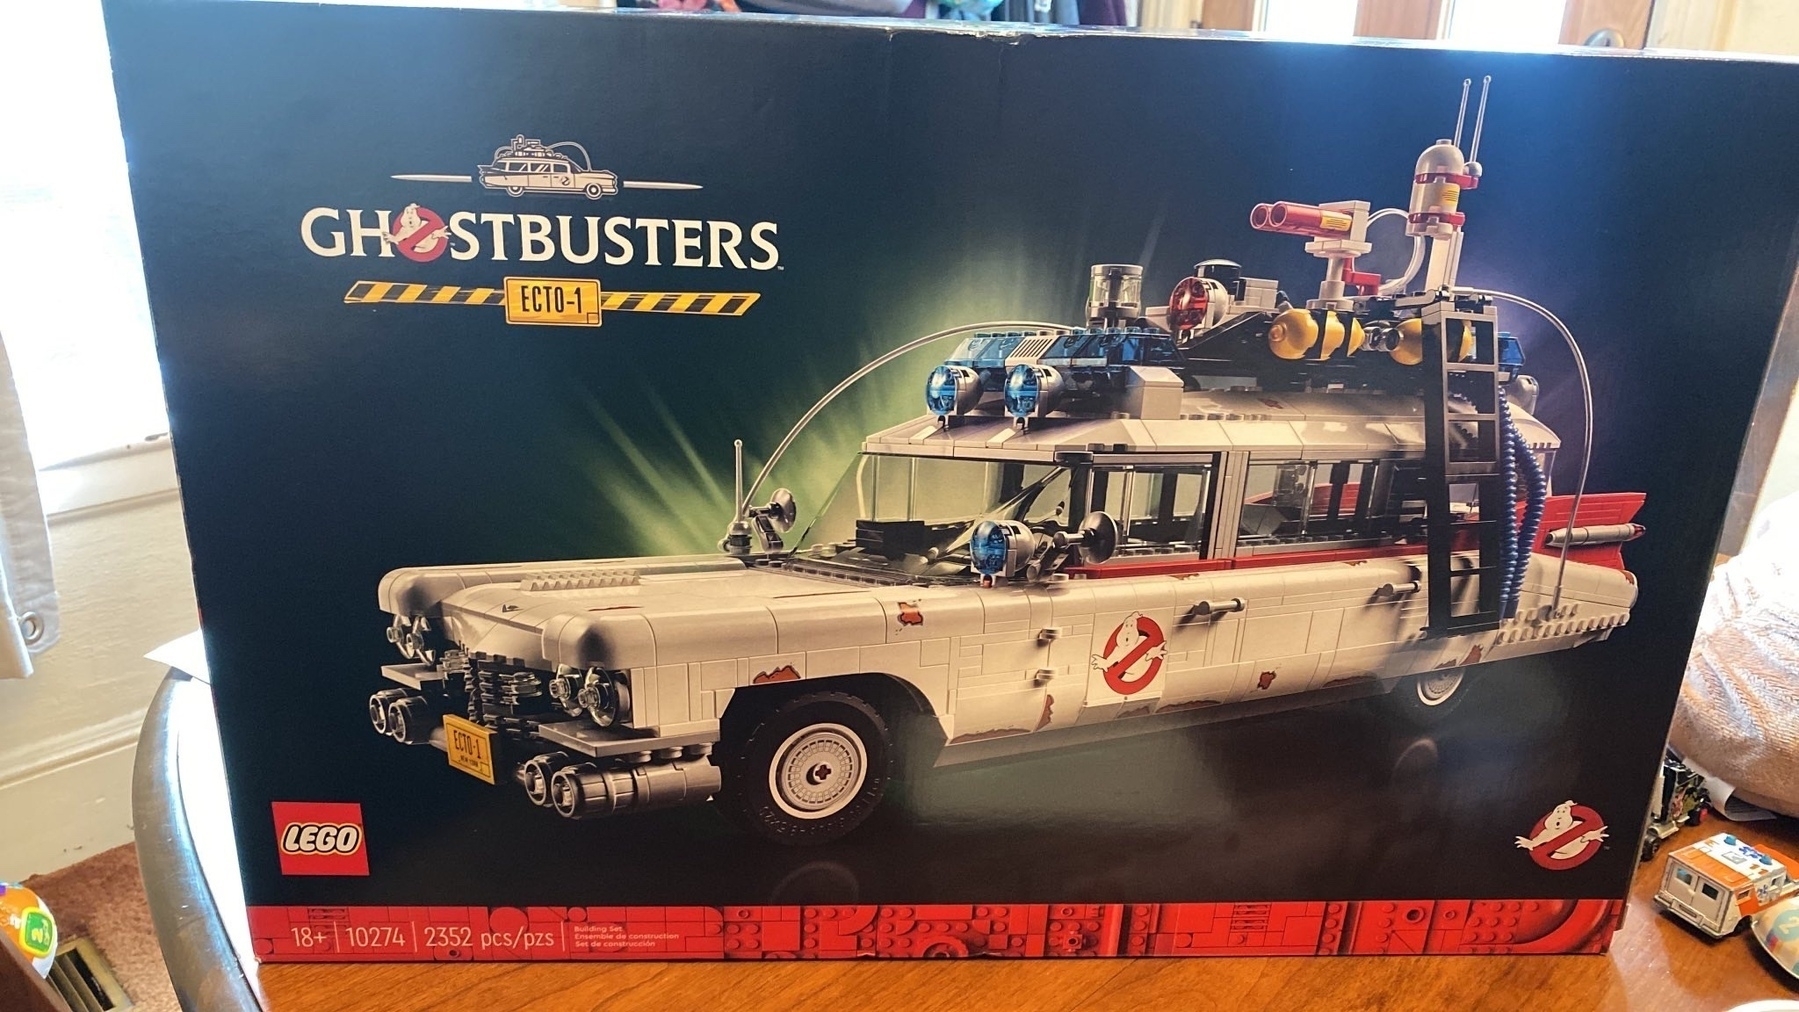 The Ghostbusters Ecto 1 Lego set sitting on a table with a couple Matchbox cars next to the box.